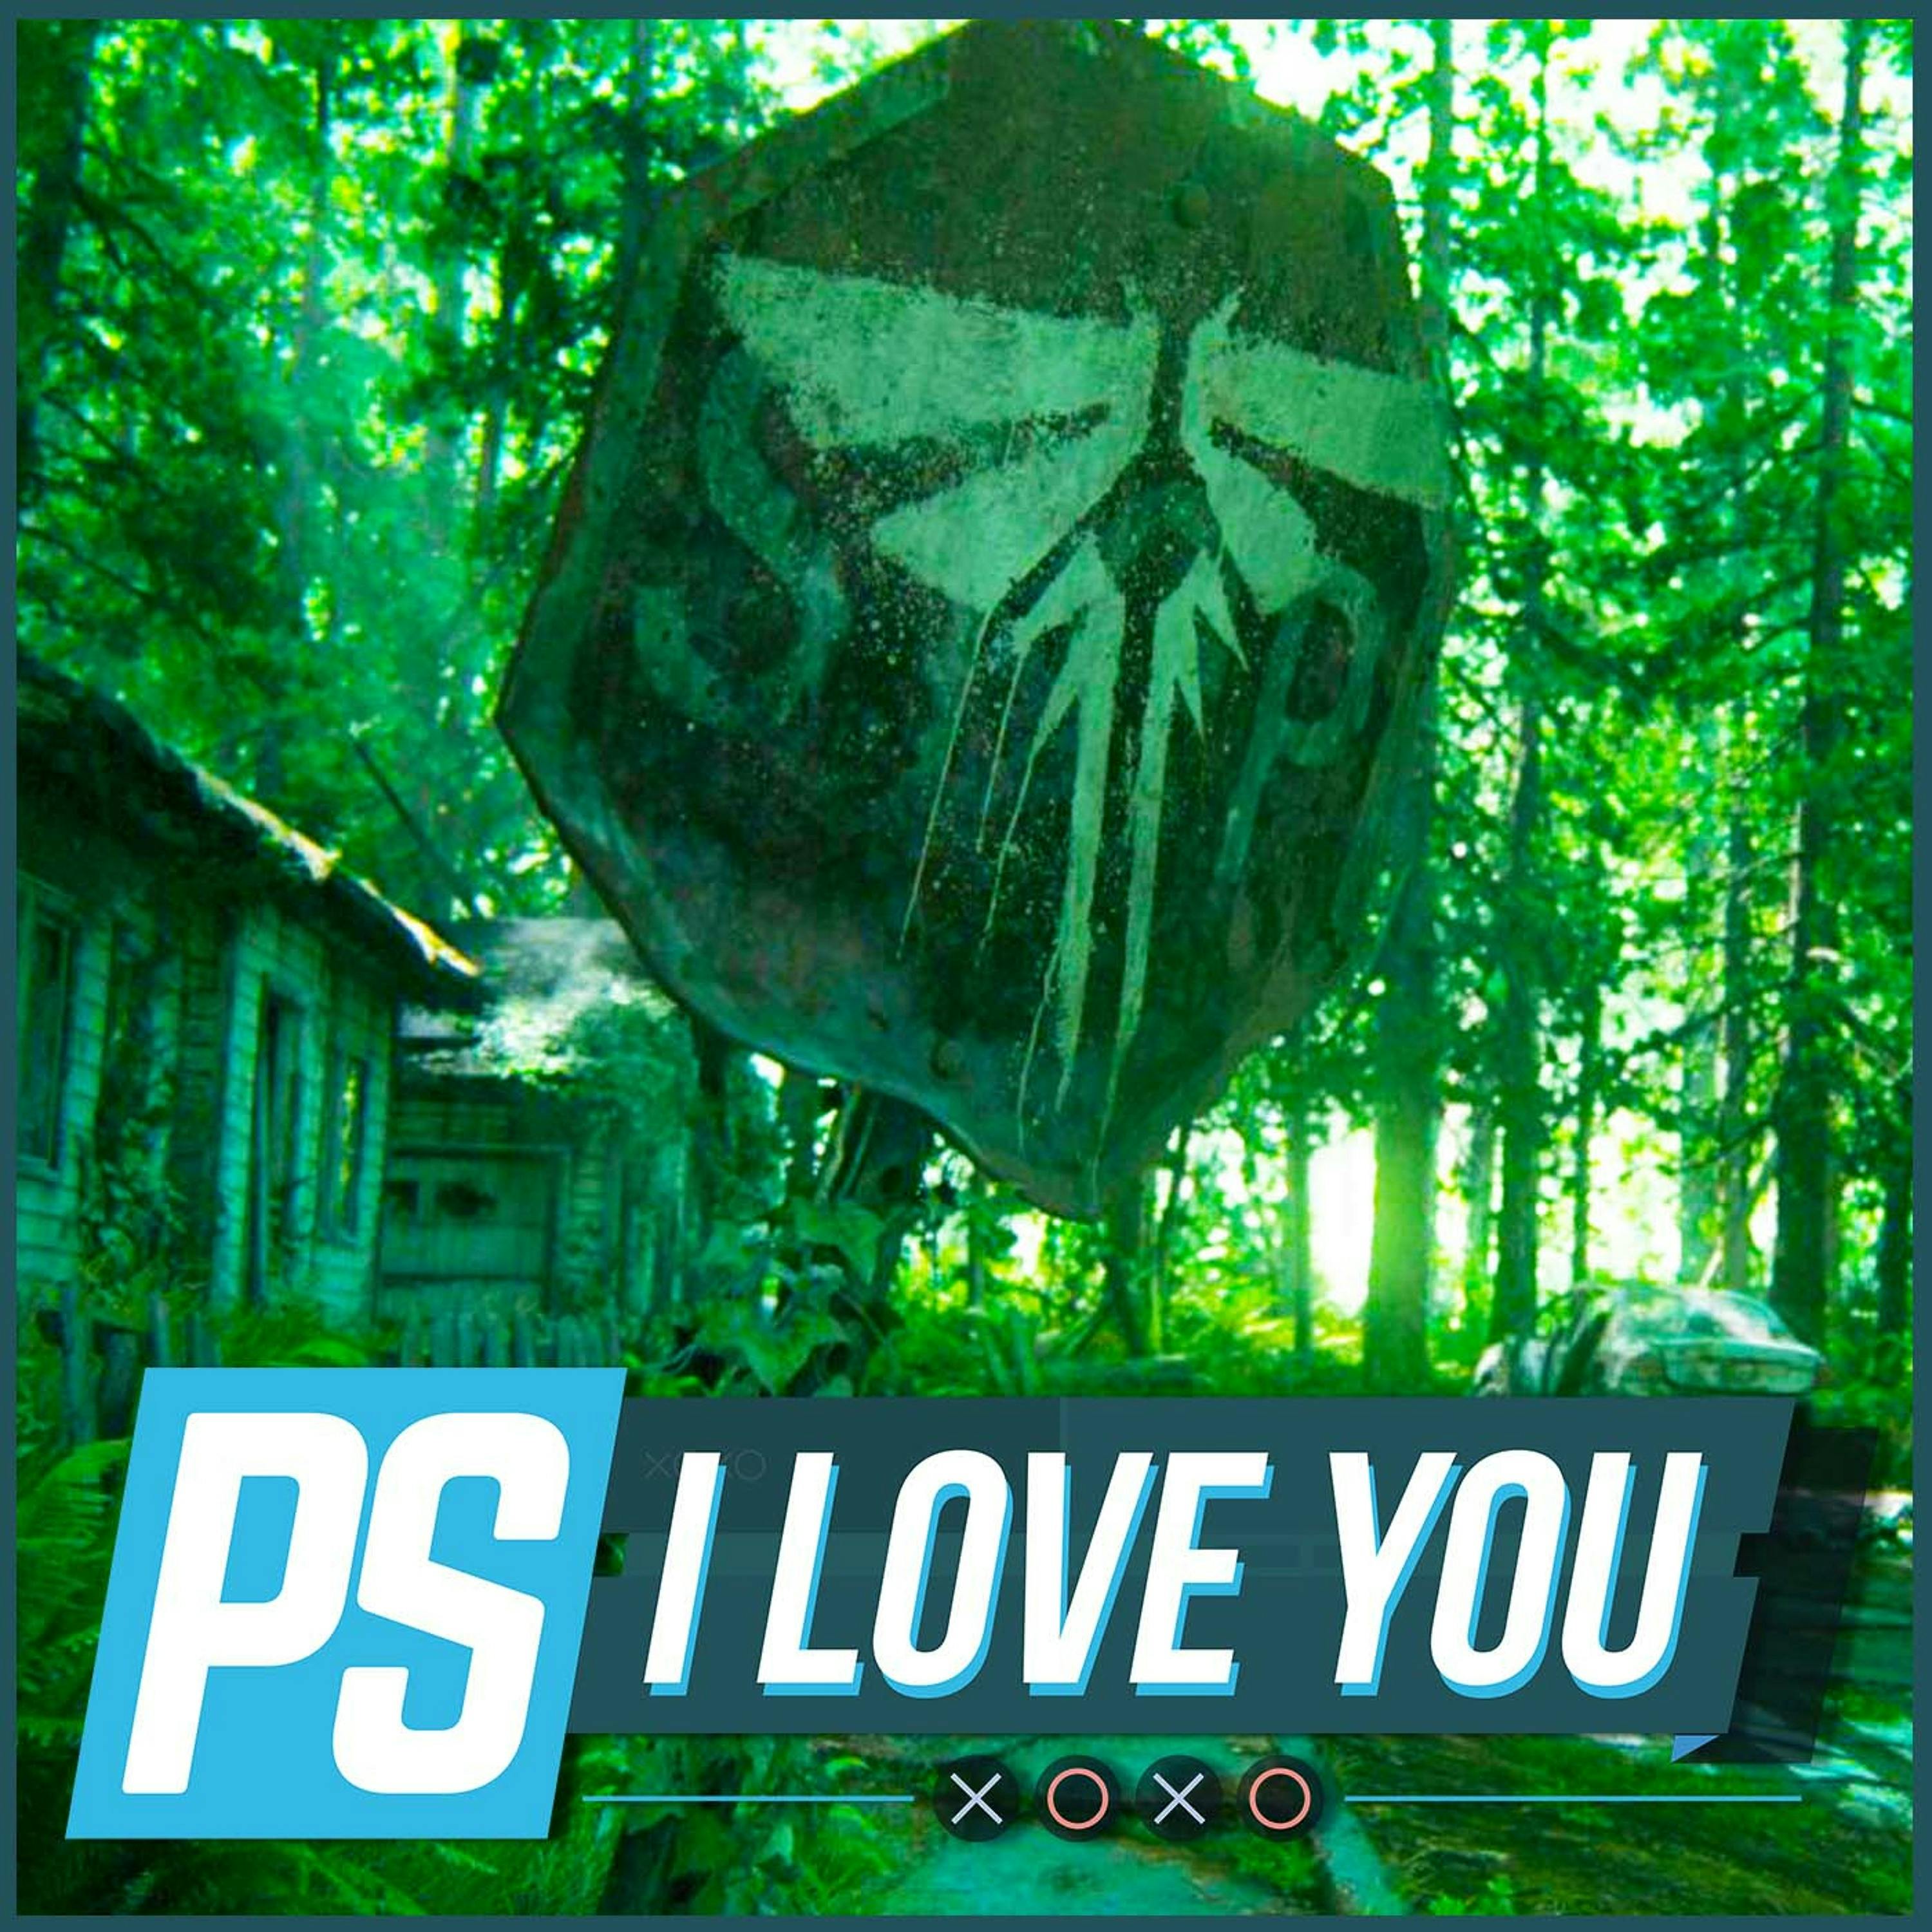 The Last of Us Part II Theories - PS I Love You XOXO Ep. 65